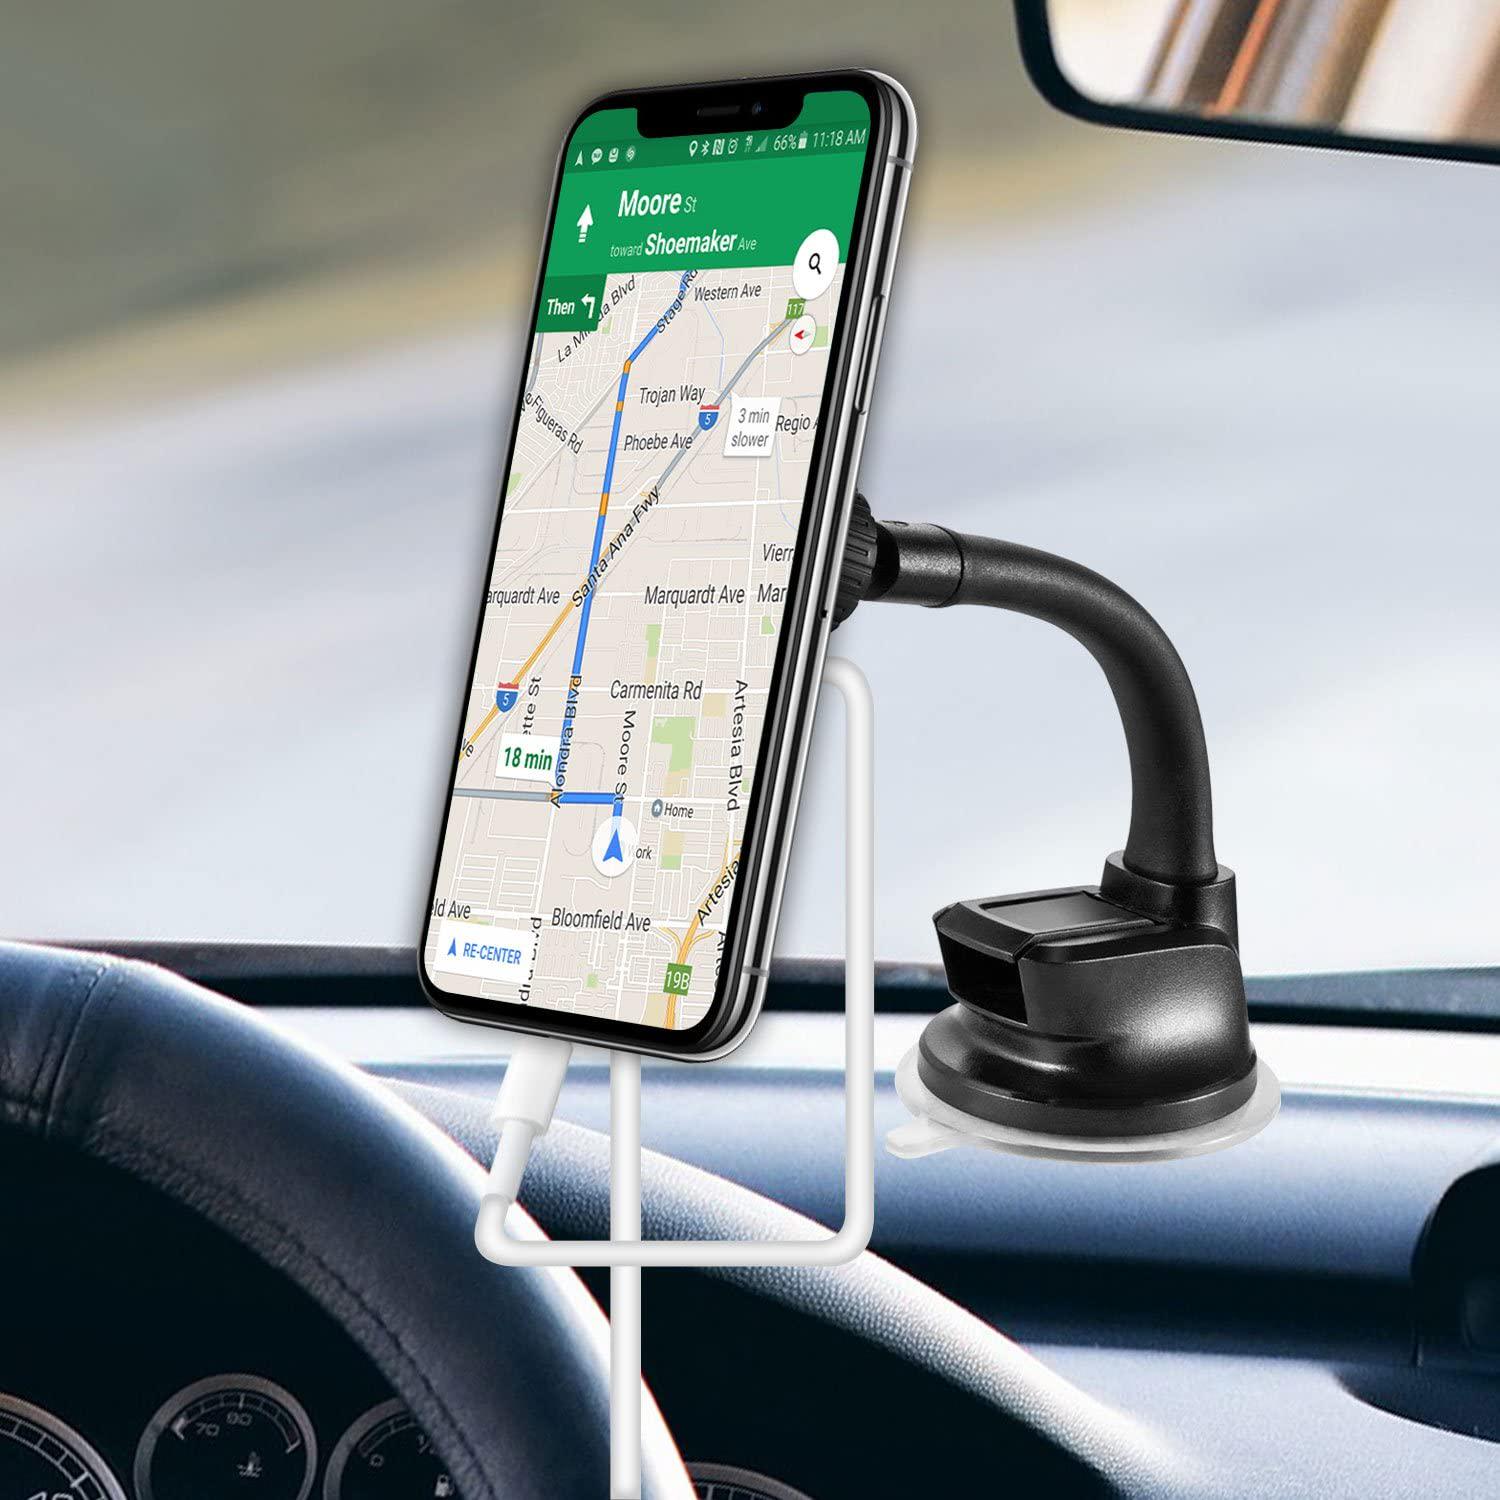 cellet, Magnetic DashBoard/Windshield Mount with Flexible Goose Neck For LG LG G7 ThinQ/G6/Aristo2 Plus/Q7+/V30/V35 ThinQ/Stylo 4 2 V/K30/K20 V/K20 PlusG6/K8/Exalt LTE/X venture/Phonenix Plus/Harmony2/Tribute